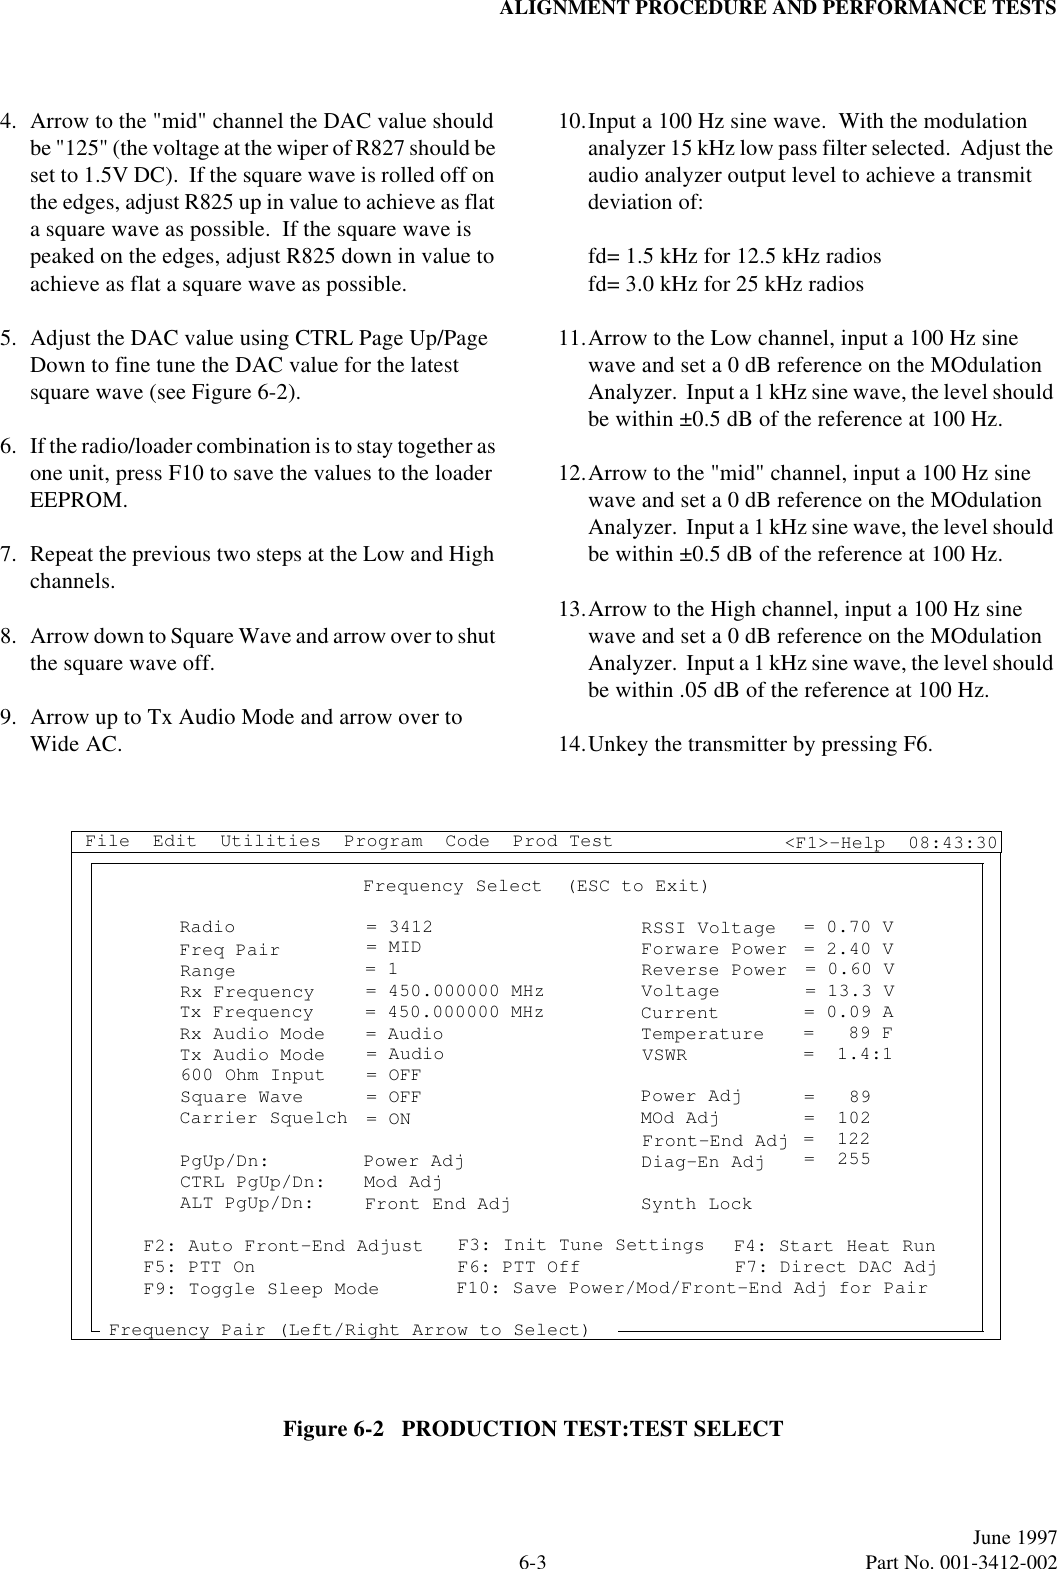 ALIGNMENT PROCEDURE AND PERFORMANCE TESTS6-3June 1997  Part No. 001-3412-0024. Arrow to the &quot;mid&quot; channel the DAC value should be &quot;125&quot; (the voltage at the wiper of R827 should be set to 1.5V DC).  If the square wave is rolled off on the edges, adjust R825 up in value to achieve as flat a square wave as possible.  If the square wave is peaked on the edges, adjust R825 down in value to achieve as flat a square wave as possible.5. Adjust the DAC value using CTRL Page Up/Page Down to fine tune the DAC value for the latest square wave (see Figure 6-2).6. If the radio/loader combination is to stay together as one unit, press F10 to save the values to the loader EEPROM.7. Repeat the previous two steps at the Low and High channels.8. Arrow down to Square Wave and arrow over to shut the square wave off.9. Arrow up to Tx Audio Mode and arrow over to Wide AC.10.Input a 100 Hz sine wave.  With the modulation analyzer 15 kHz low pass filter selected.  Adjust the audio analyzer output level to achieve a transmit deviation of:fd= 1.5 kHz for 12.5 kHz radiosfd= 3.0 kHz for 25 kHz radios11.Arrow to the Low channel, input a 100 Hz sine wave and set a 0 dB reference on the MOdulation Analyzer.  Input a 1 kHz sine wave, the level should be within ±0.5 dB of the reference at 100 Hz.12.Arrow to the &quot;mid&quot; channel, input a 100 Hz sine wave and set a 0 dB reference on the MOdulation Analyzer.  Input a 1 kHz sine wave, the level should be within ±0.5 dB of the reference at 100 Hz.13.Arrow to the High channel, input a 100 Hz sine wave and set a 0 dB reference on the MOdulation Analyzer.  Input a 1 kHz sine wave, the level should be within .05 dB of the reference at 100 Hz.14.Unkey the transmitter by pressing F6.Figure 6-2   PRODUCTION TEST:TEST SELECTRadioFreq PairRangeRx FrequencyTx FrequencyRx Audio ModeTx Audio Mode600 Ohm InputSquare WaveCarrier SquelchPgUp/Dn:CTRL PgUp/Dn:ALT PgUp/Dn:= 3412= MID= 1= 450.000000 MHz= 450.000000 MHz= Audio= Audio= OFF= OFF= ON Power AdjMod AdjFront End AdjF2: Auto Front-End AdjustF5: PTT OnF9: Toggle Sleep ModeFrequency Pair (Left/Right Arrow to Select)F3: Init Tune SettingsF6: PTT OffF10: Save Power/Mod/Front-End Adj for PairF4: Start Heat RunF7: Direct DAC AdjFrequency Select  (ESC to Exit)RSSI VoltageForware PowerReverse PowerVoltageCurrentTemperatureVSWRPower AdjMOd AdjFront-End AdjDiag-En AdjSynth Lock= 0.70 V= 2.40 V= 0.60 V= 13.3 V= 0.09 A=   89 F=  1.4:1=   89=  102=  122=  255File  Edit  Utilities  Program  Code  Prod Test &lt;F1&gt;-Help  08:43:30